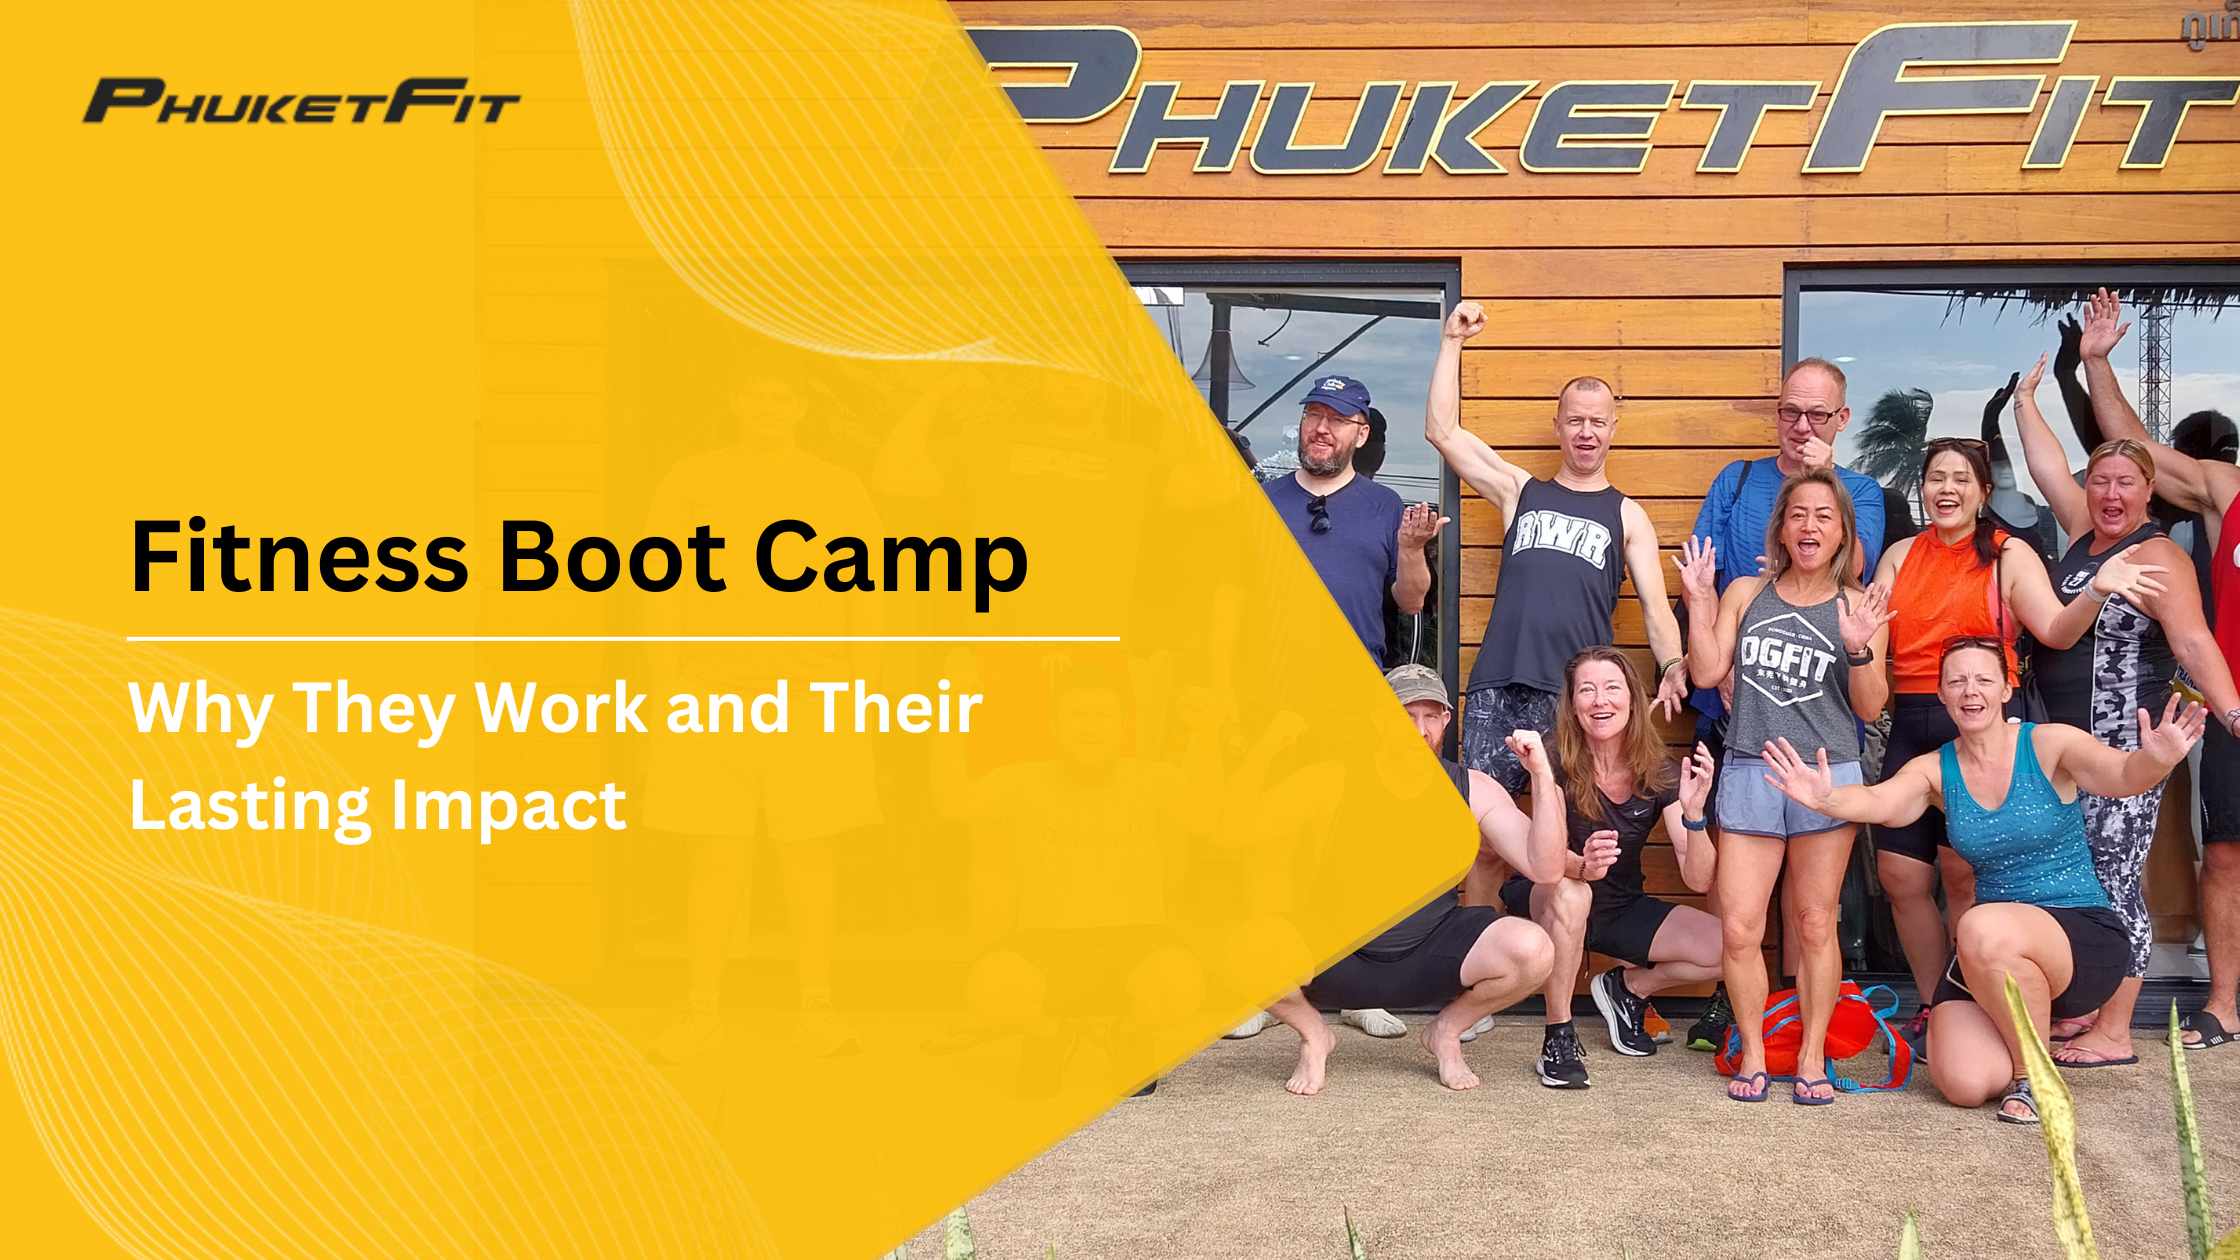 Fitness Boot Camp - Why They Work and Their Lasting Impact - PhuketFit